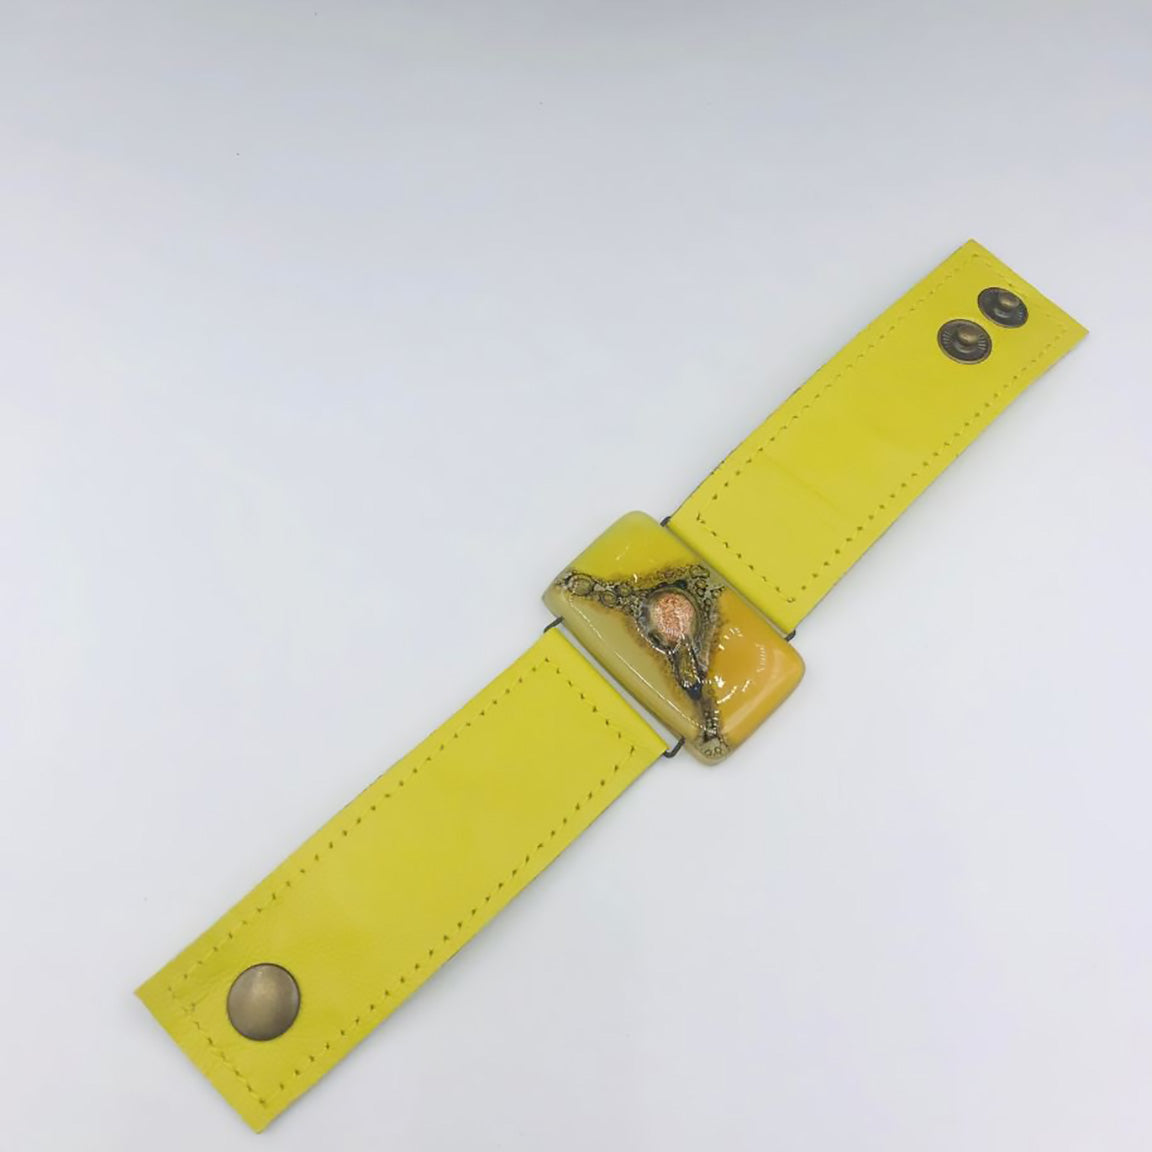 Cristalida Fashion Bracelet For Women- Yellow - Leather - Width 1.1 Inches, 3 Cm- Jewelry